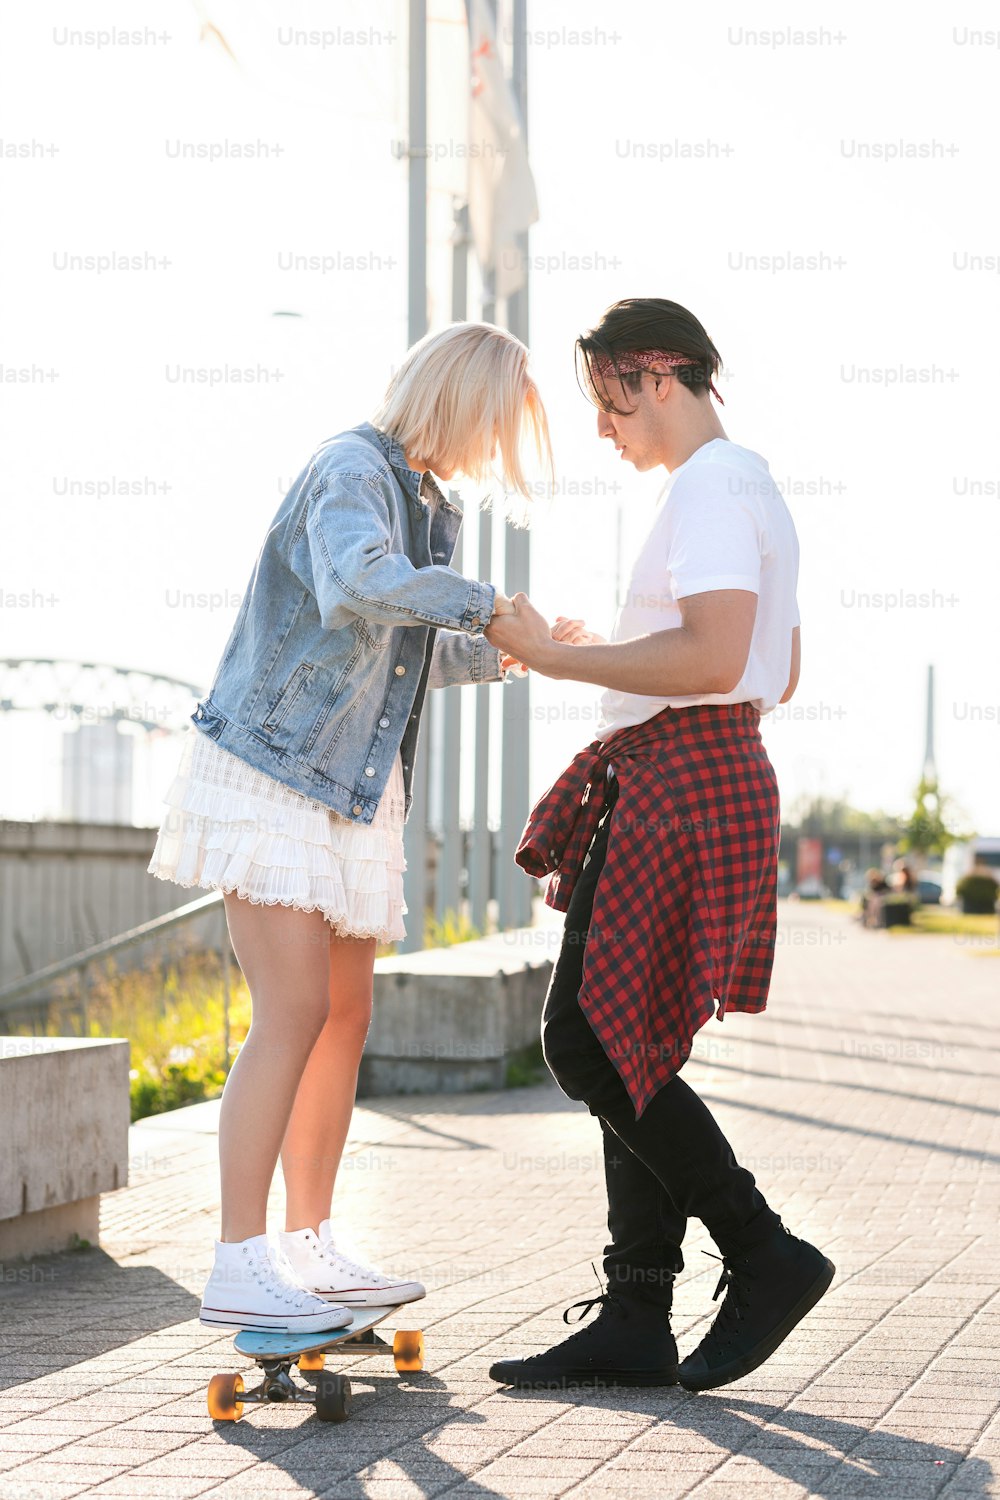 Stylish teenage couple riding longboard during their date in a city